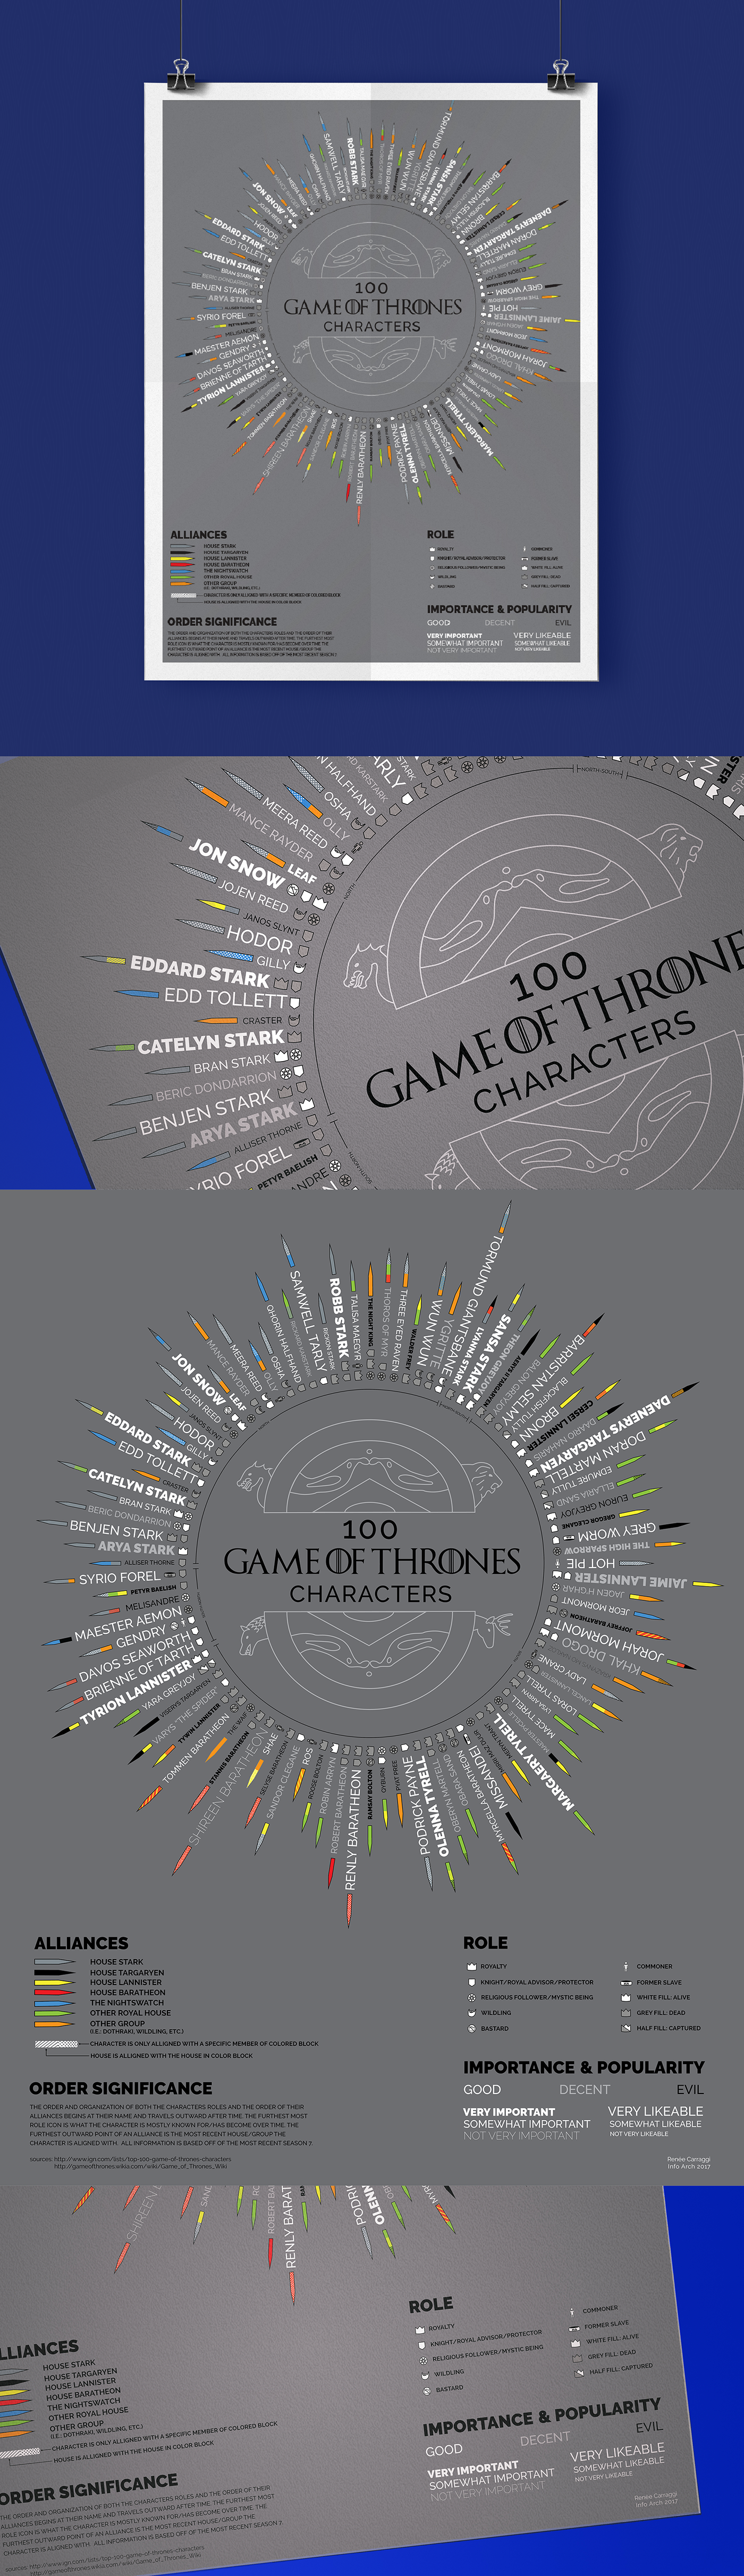 Game of Thrones infographic information architecture  typography   Heirarchy design information design